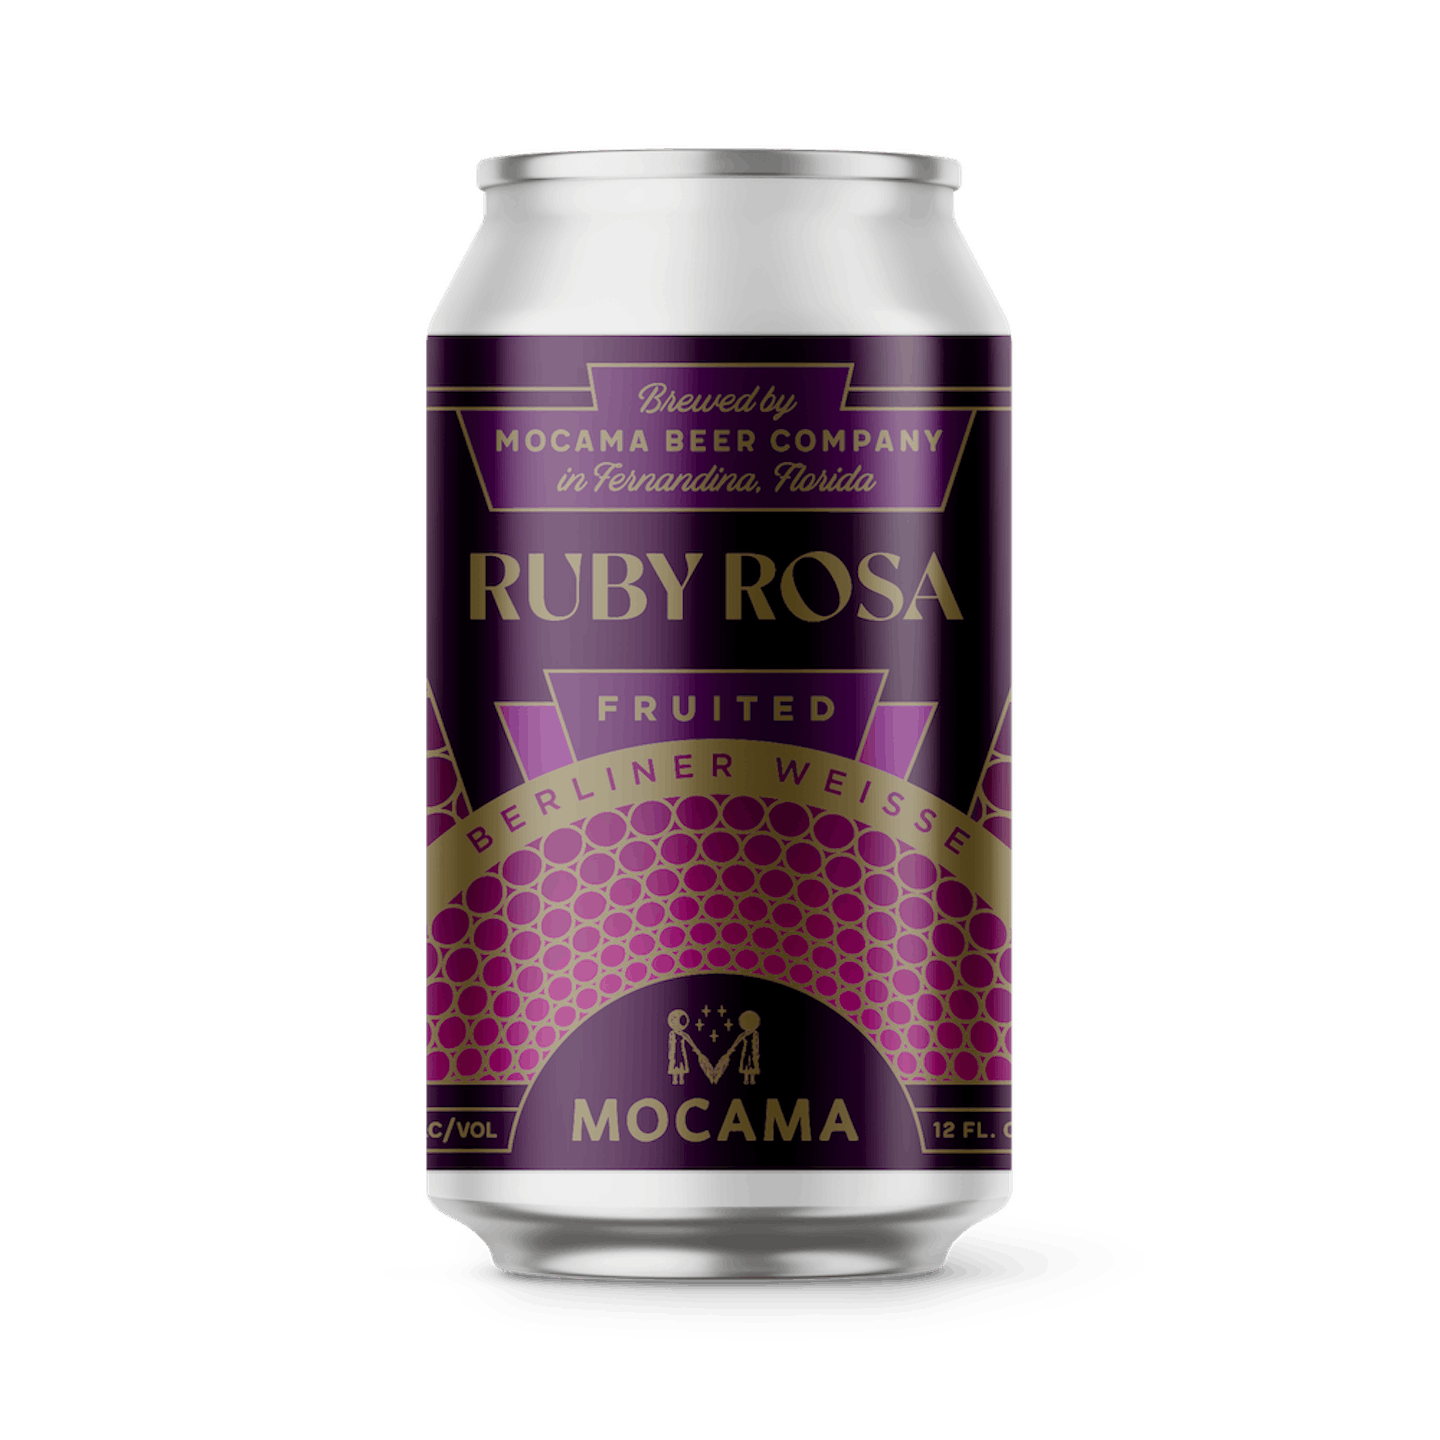 A can illustration of ruby rosa berliner weisse beer. Beautiful purple, pink and gold label on a silver aluminum can.